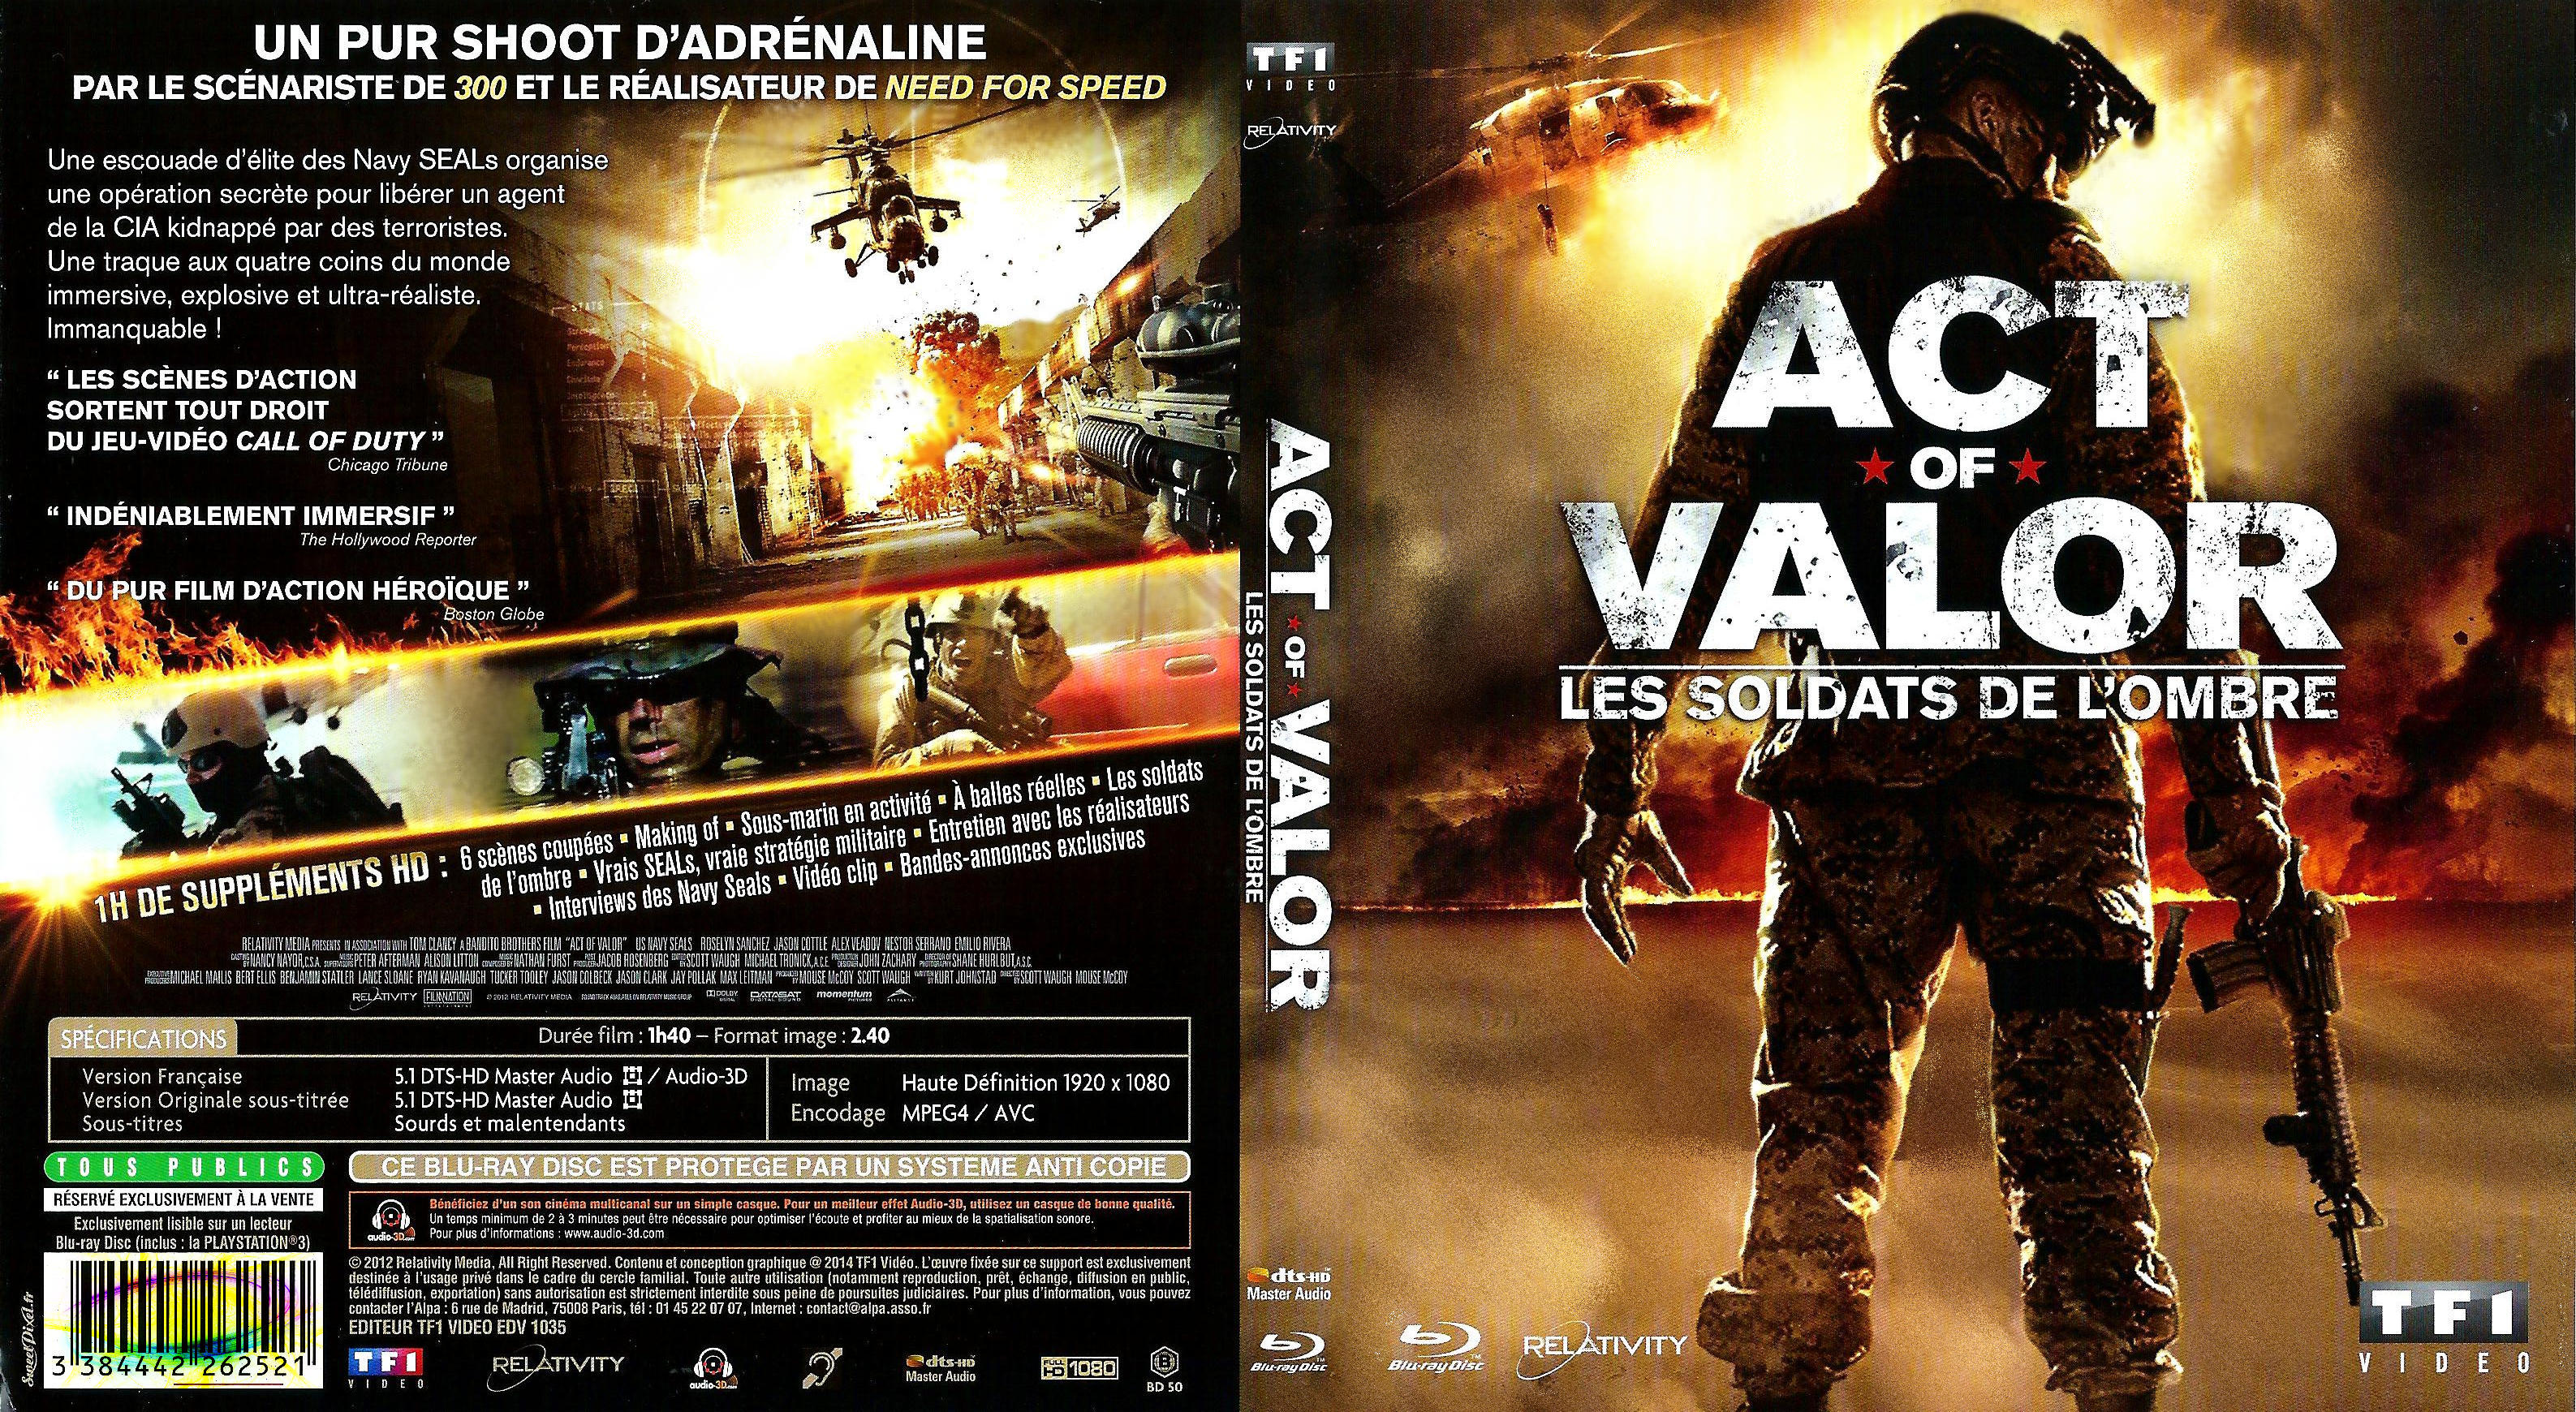 Jaquette DVD Act of Valor (BLU-RAY)